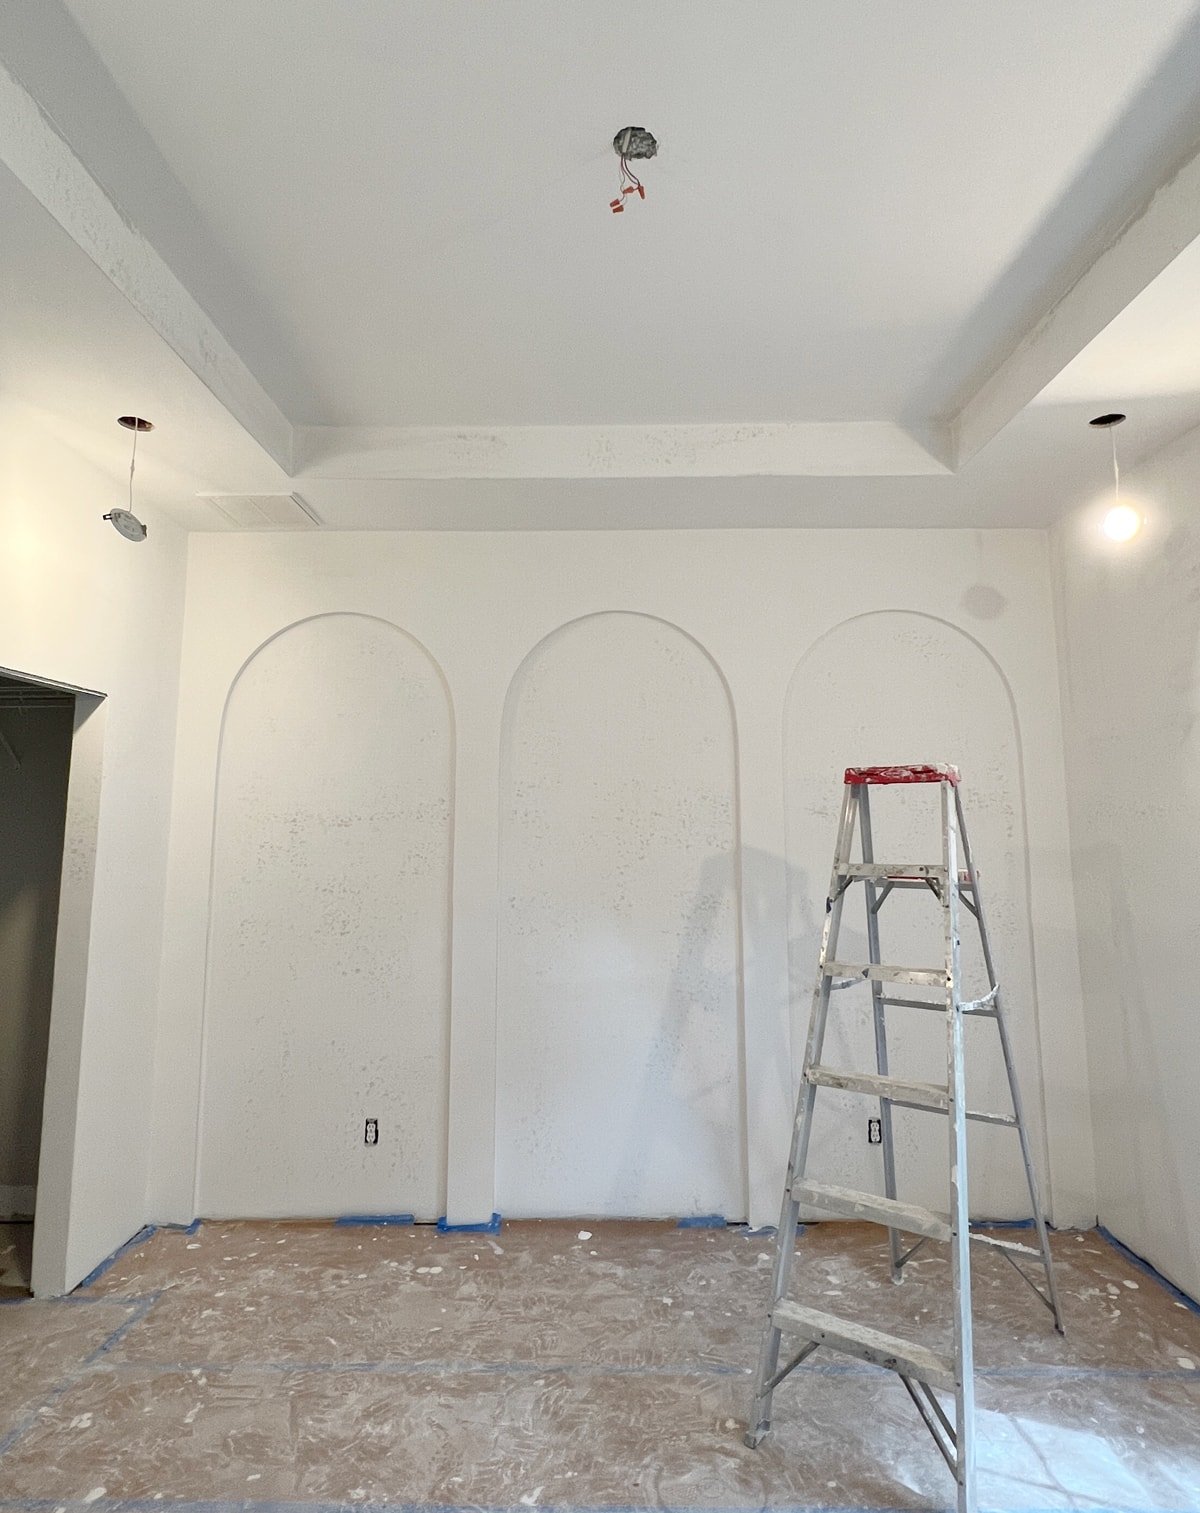 diy bedroom drywall arches tutorial and skim coating